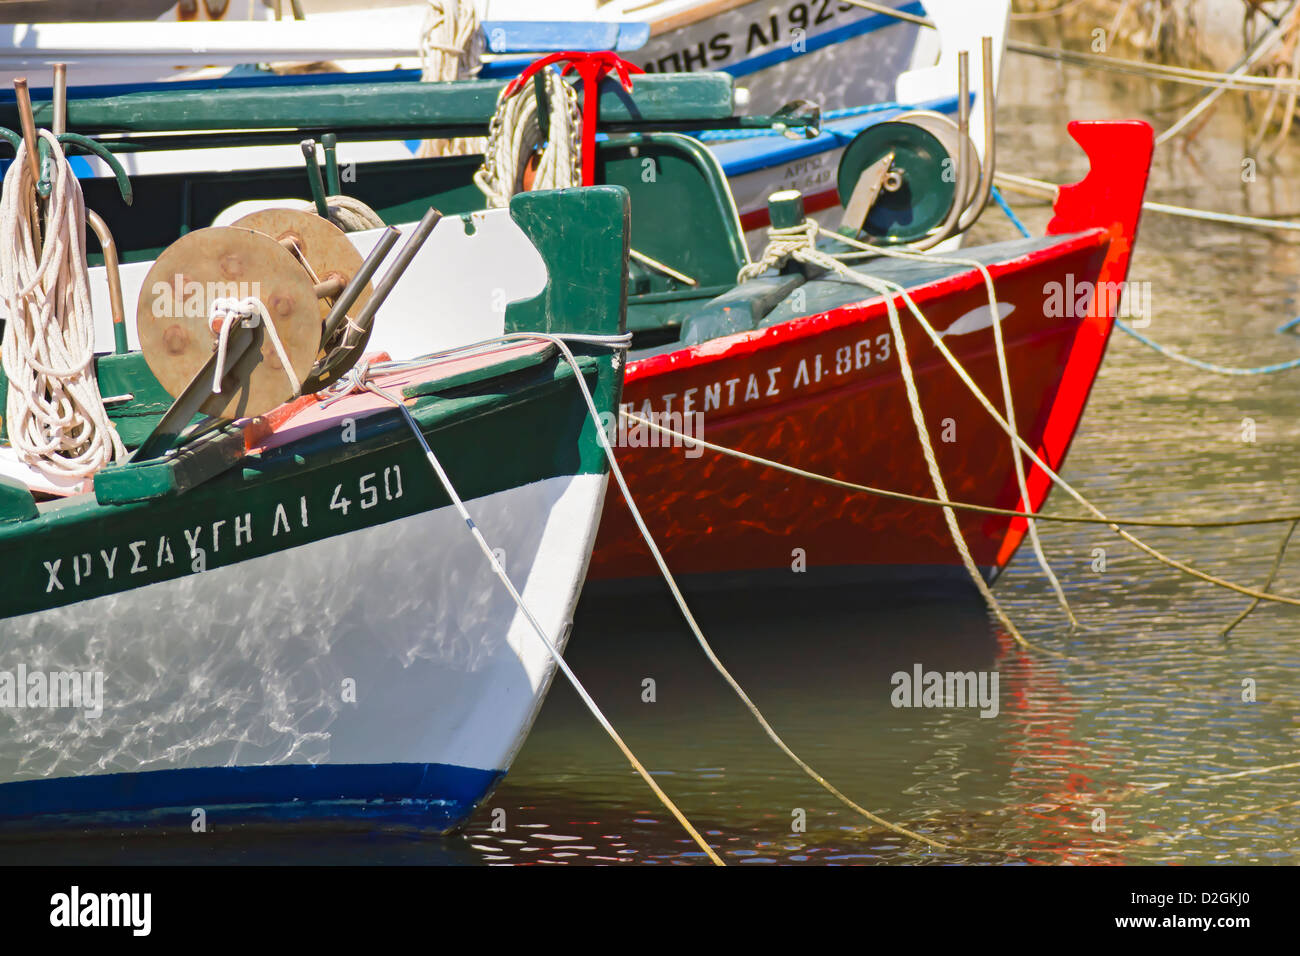 Colorful traditional fishing boats in harbor, Poros, Kefalonia, Greece, Europe Stock Photo